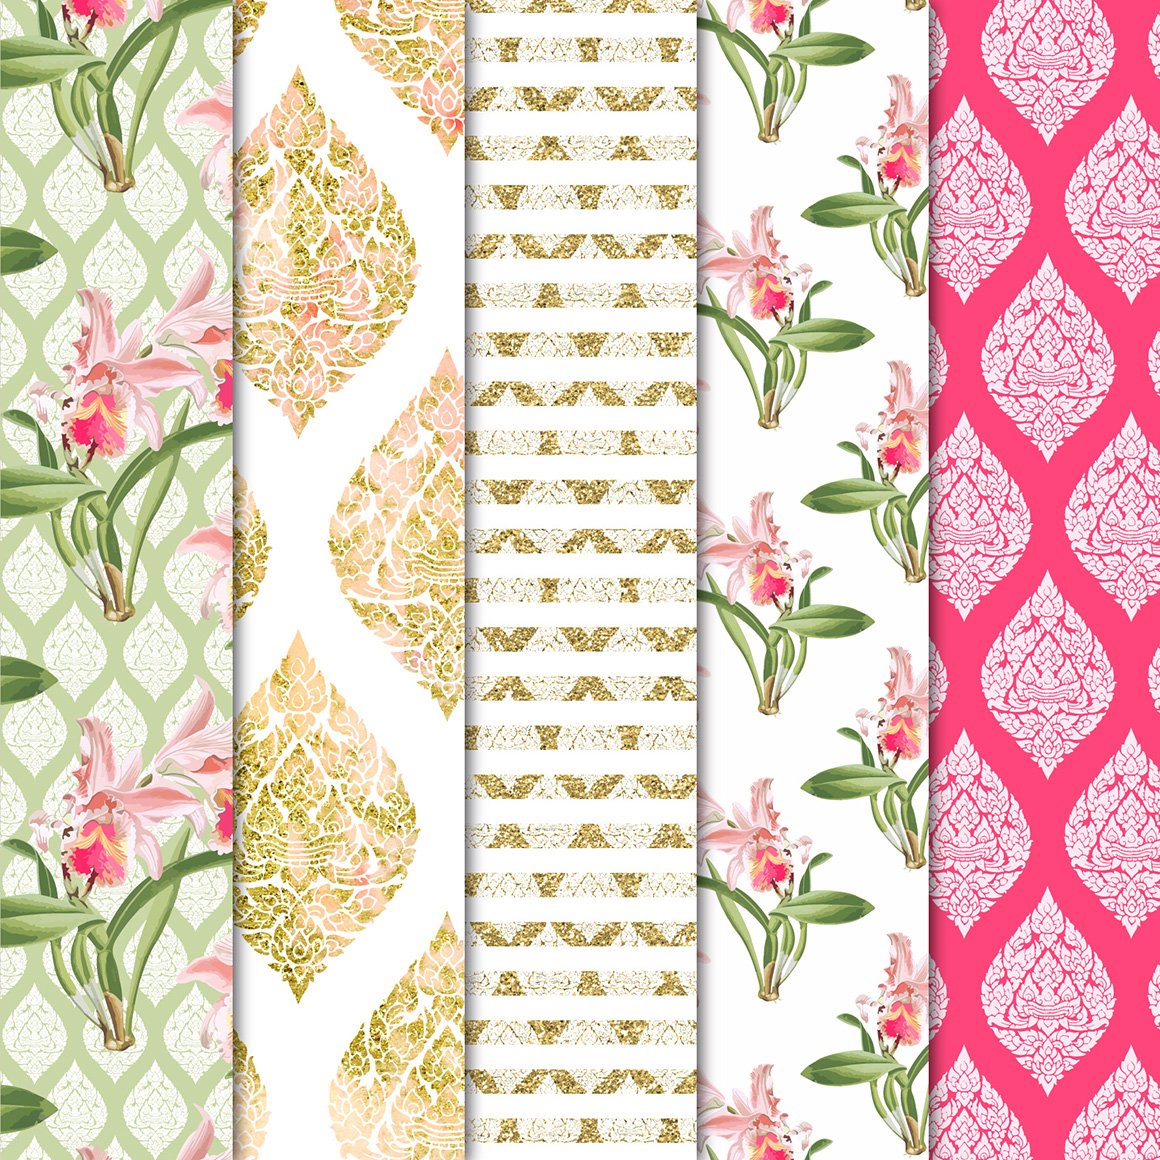 Flowers pattern collection.